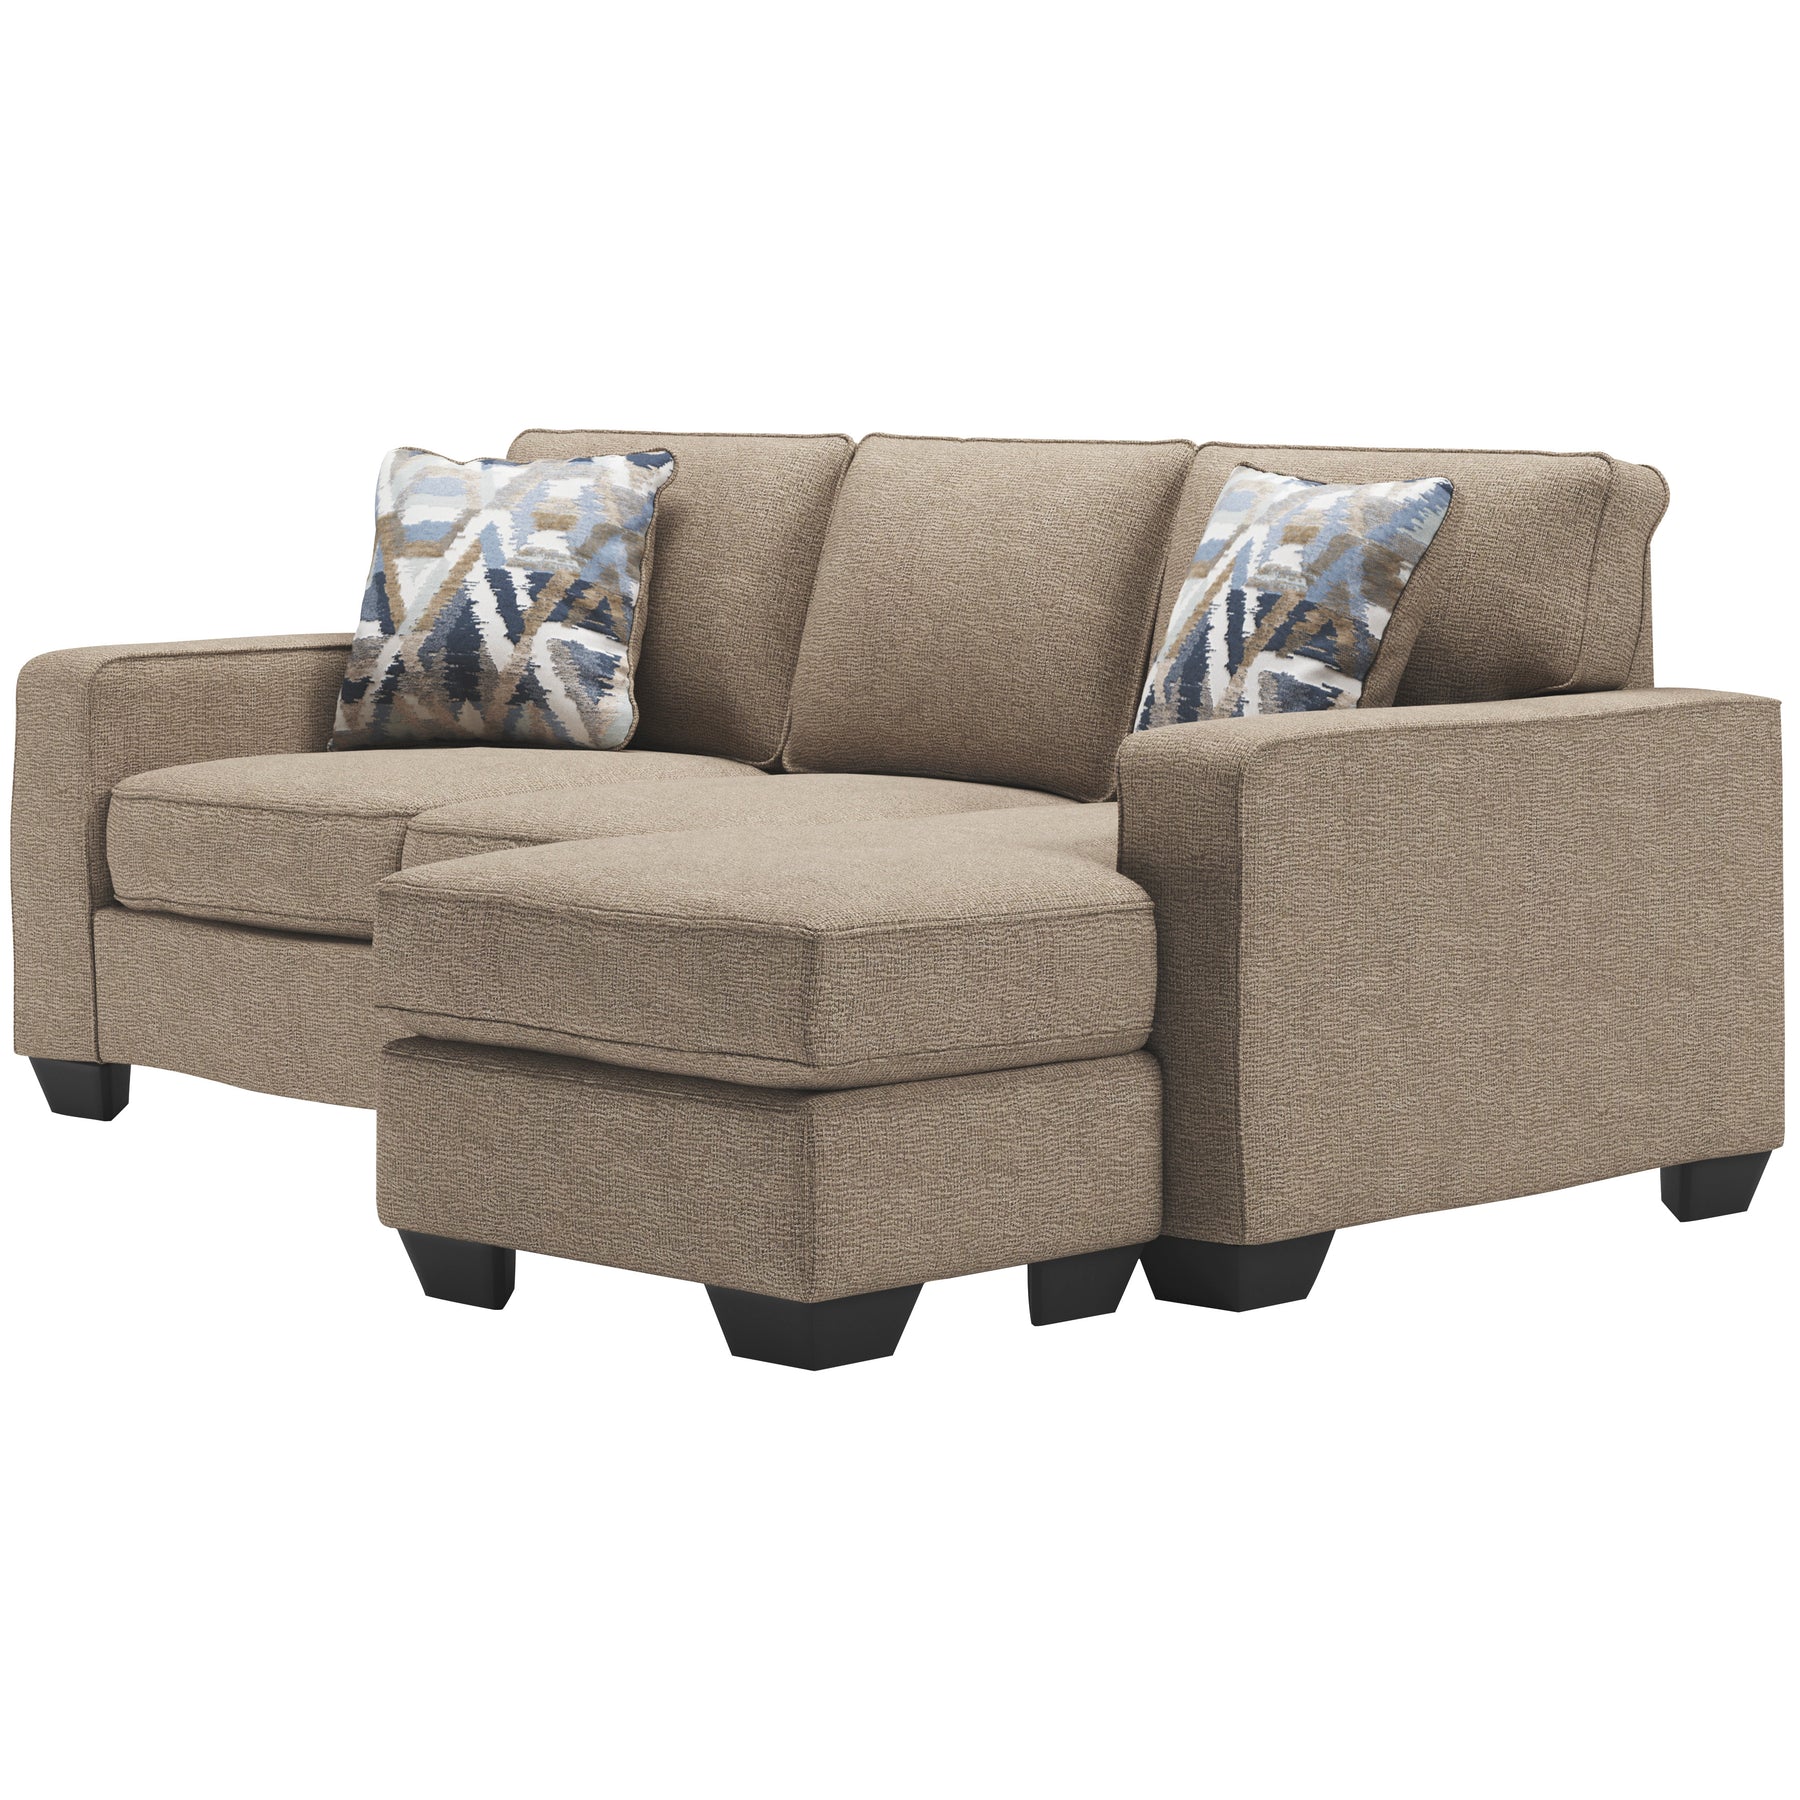 Greaves Sofa Chaise availble in two colors Greaves Sofa Chaise availble in two colors | Cheap living rooms furniture Las Vegas Nevada Half Price Furniture